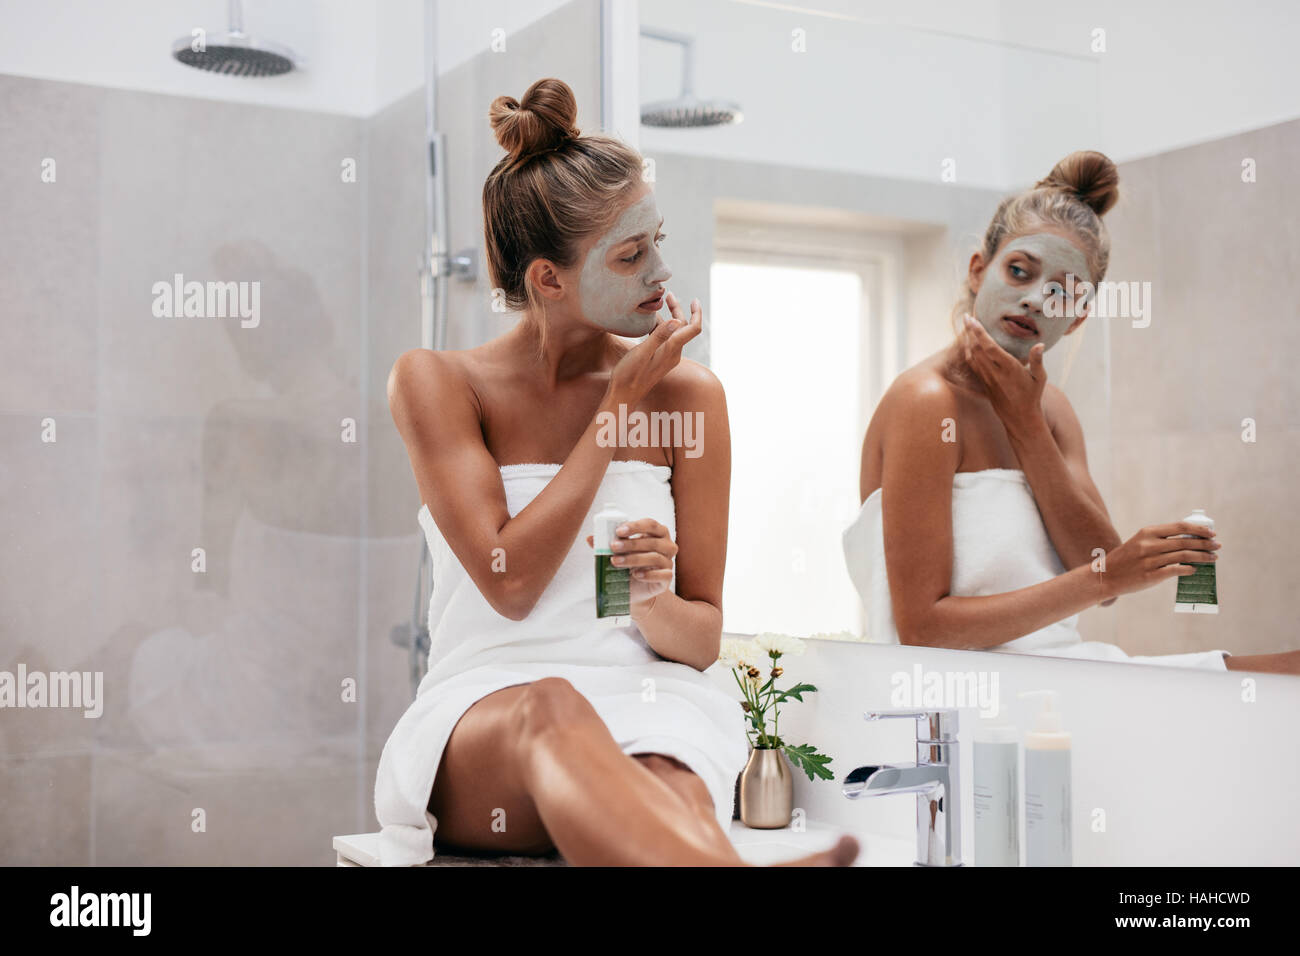 Young woman sitting in bathroom and applying facepack. Beautiful female in front of mirror applying facial mask. Stock Photo